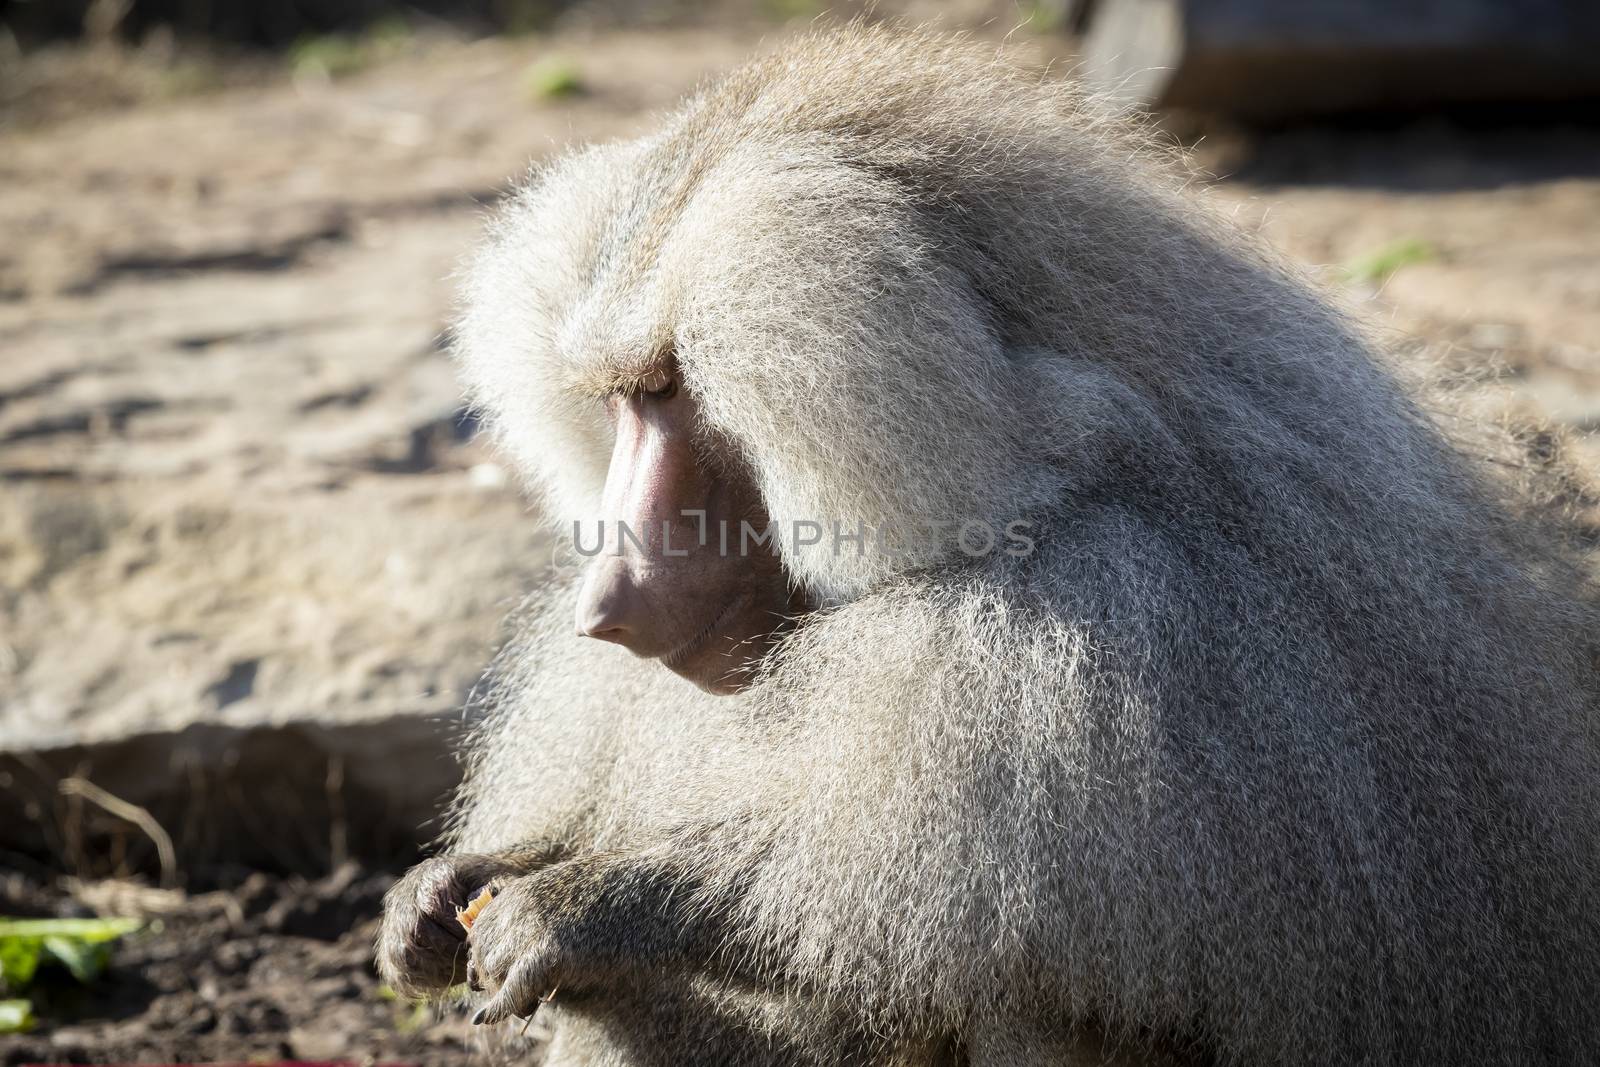 A large male Hamadryas Baboon relaxing in the sunshine by WittkePhotos